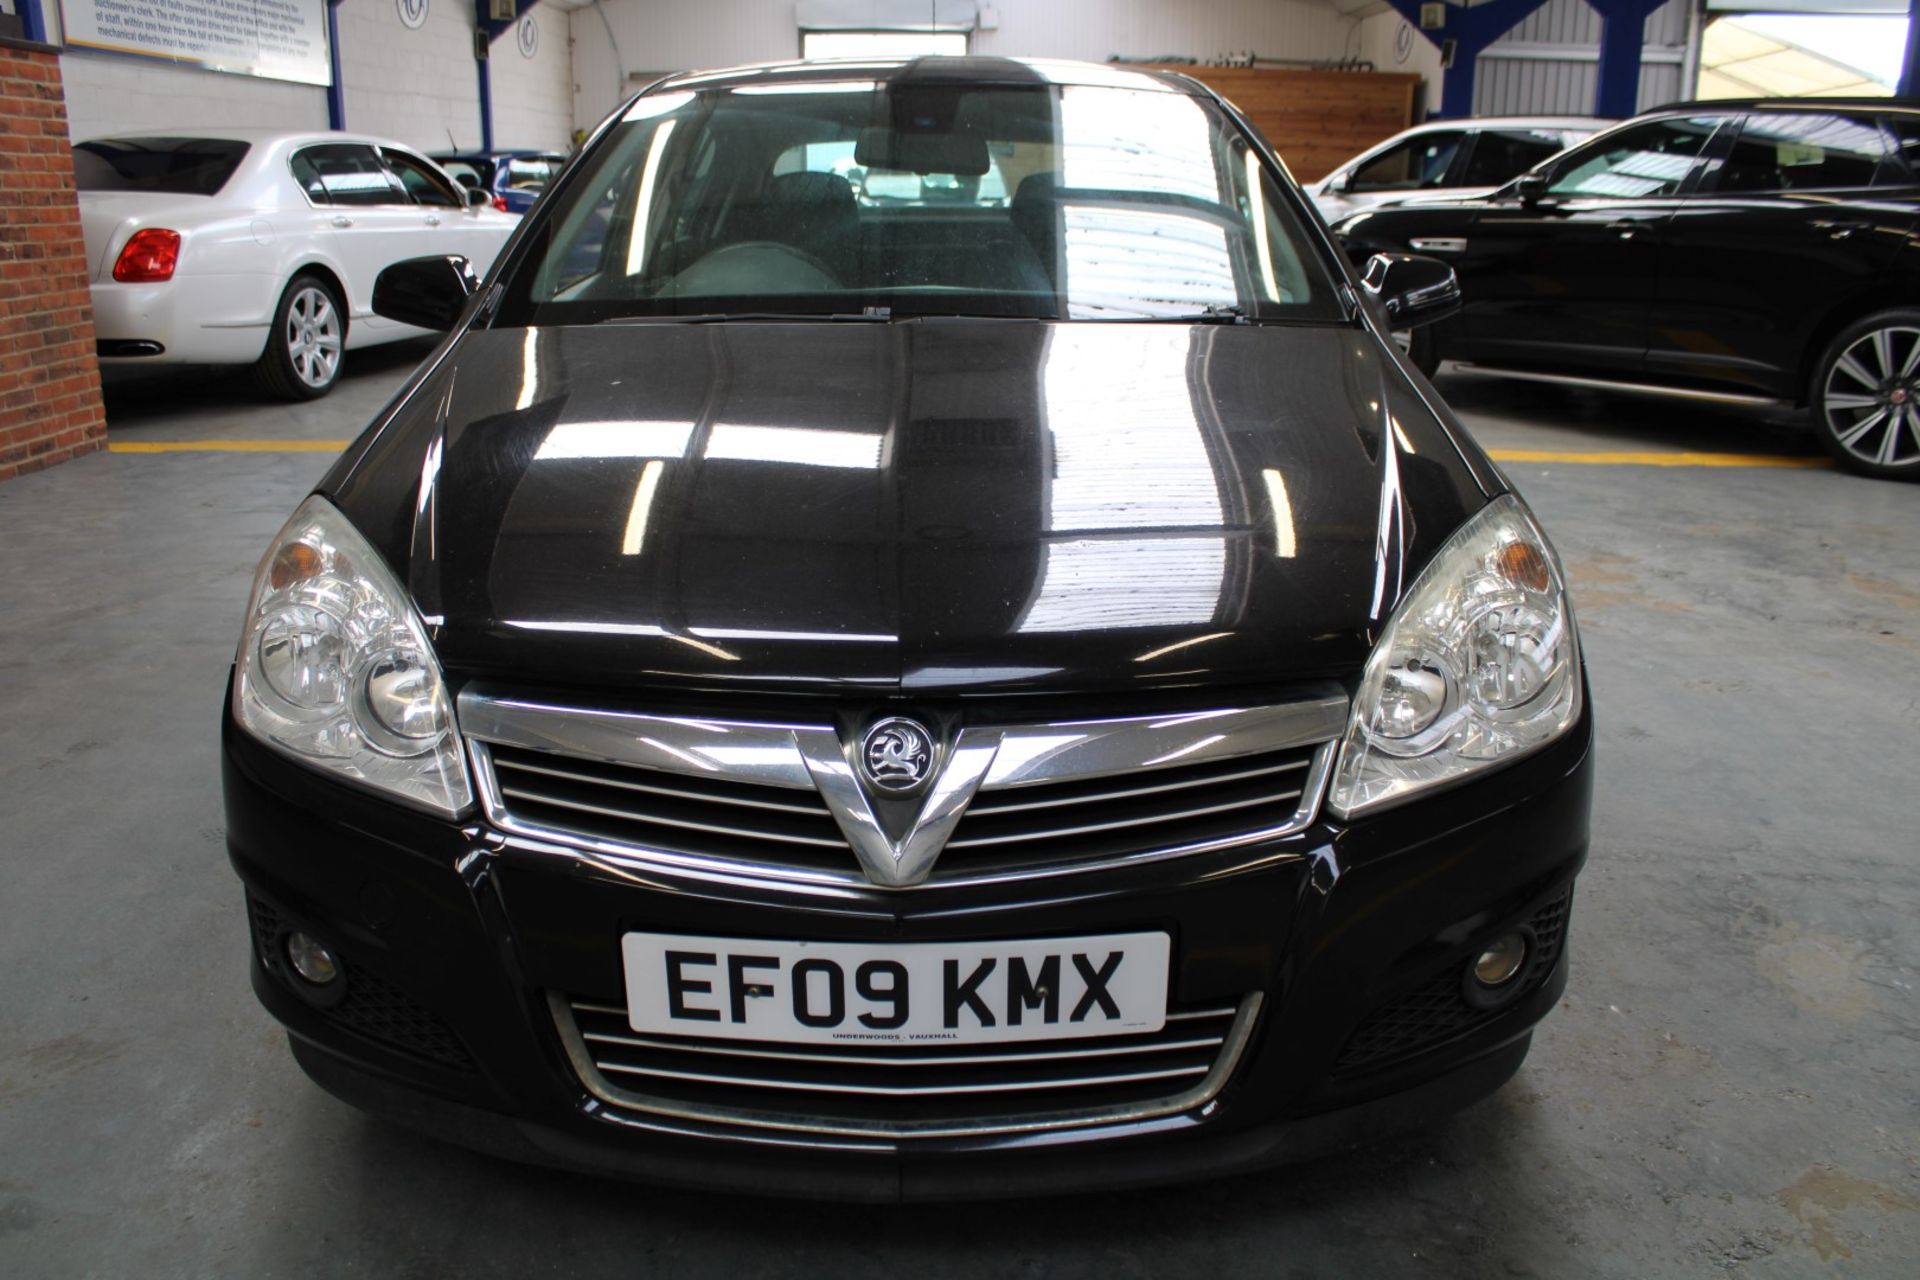 09 09 Vauxhall Astra Active Plus - Image 2 of 30